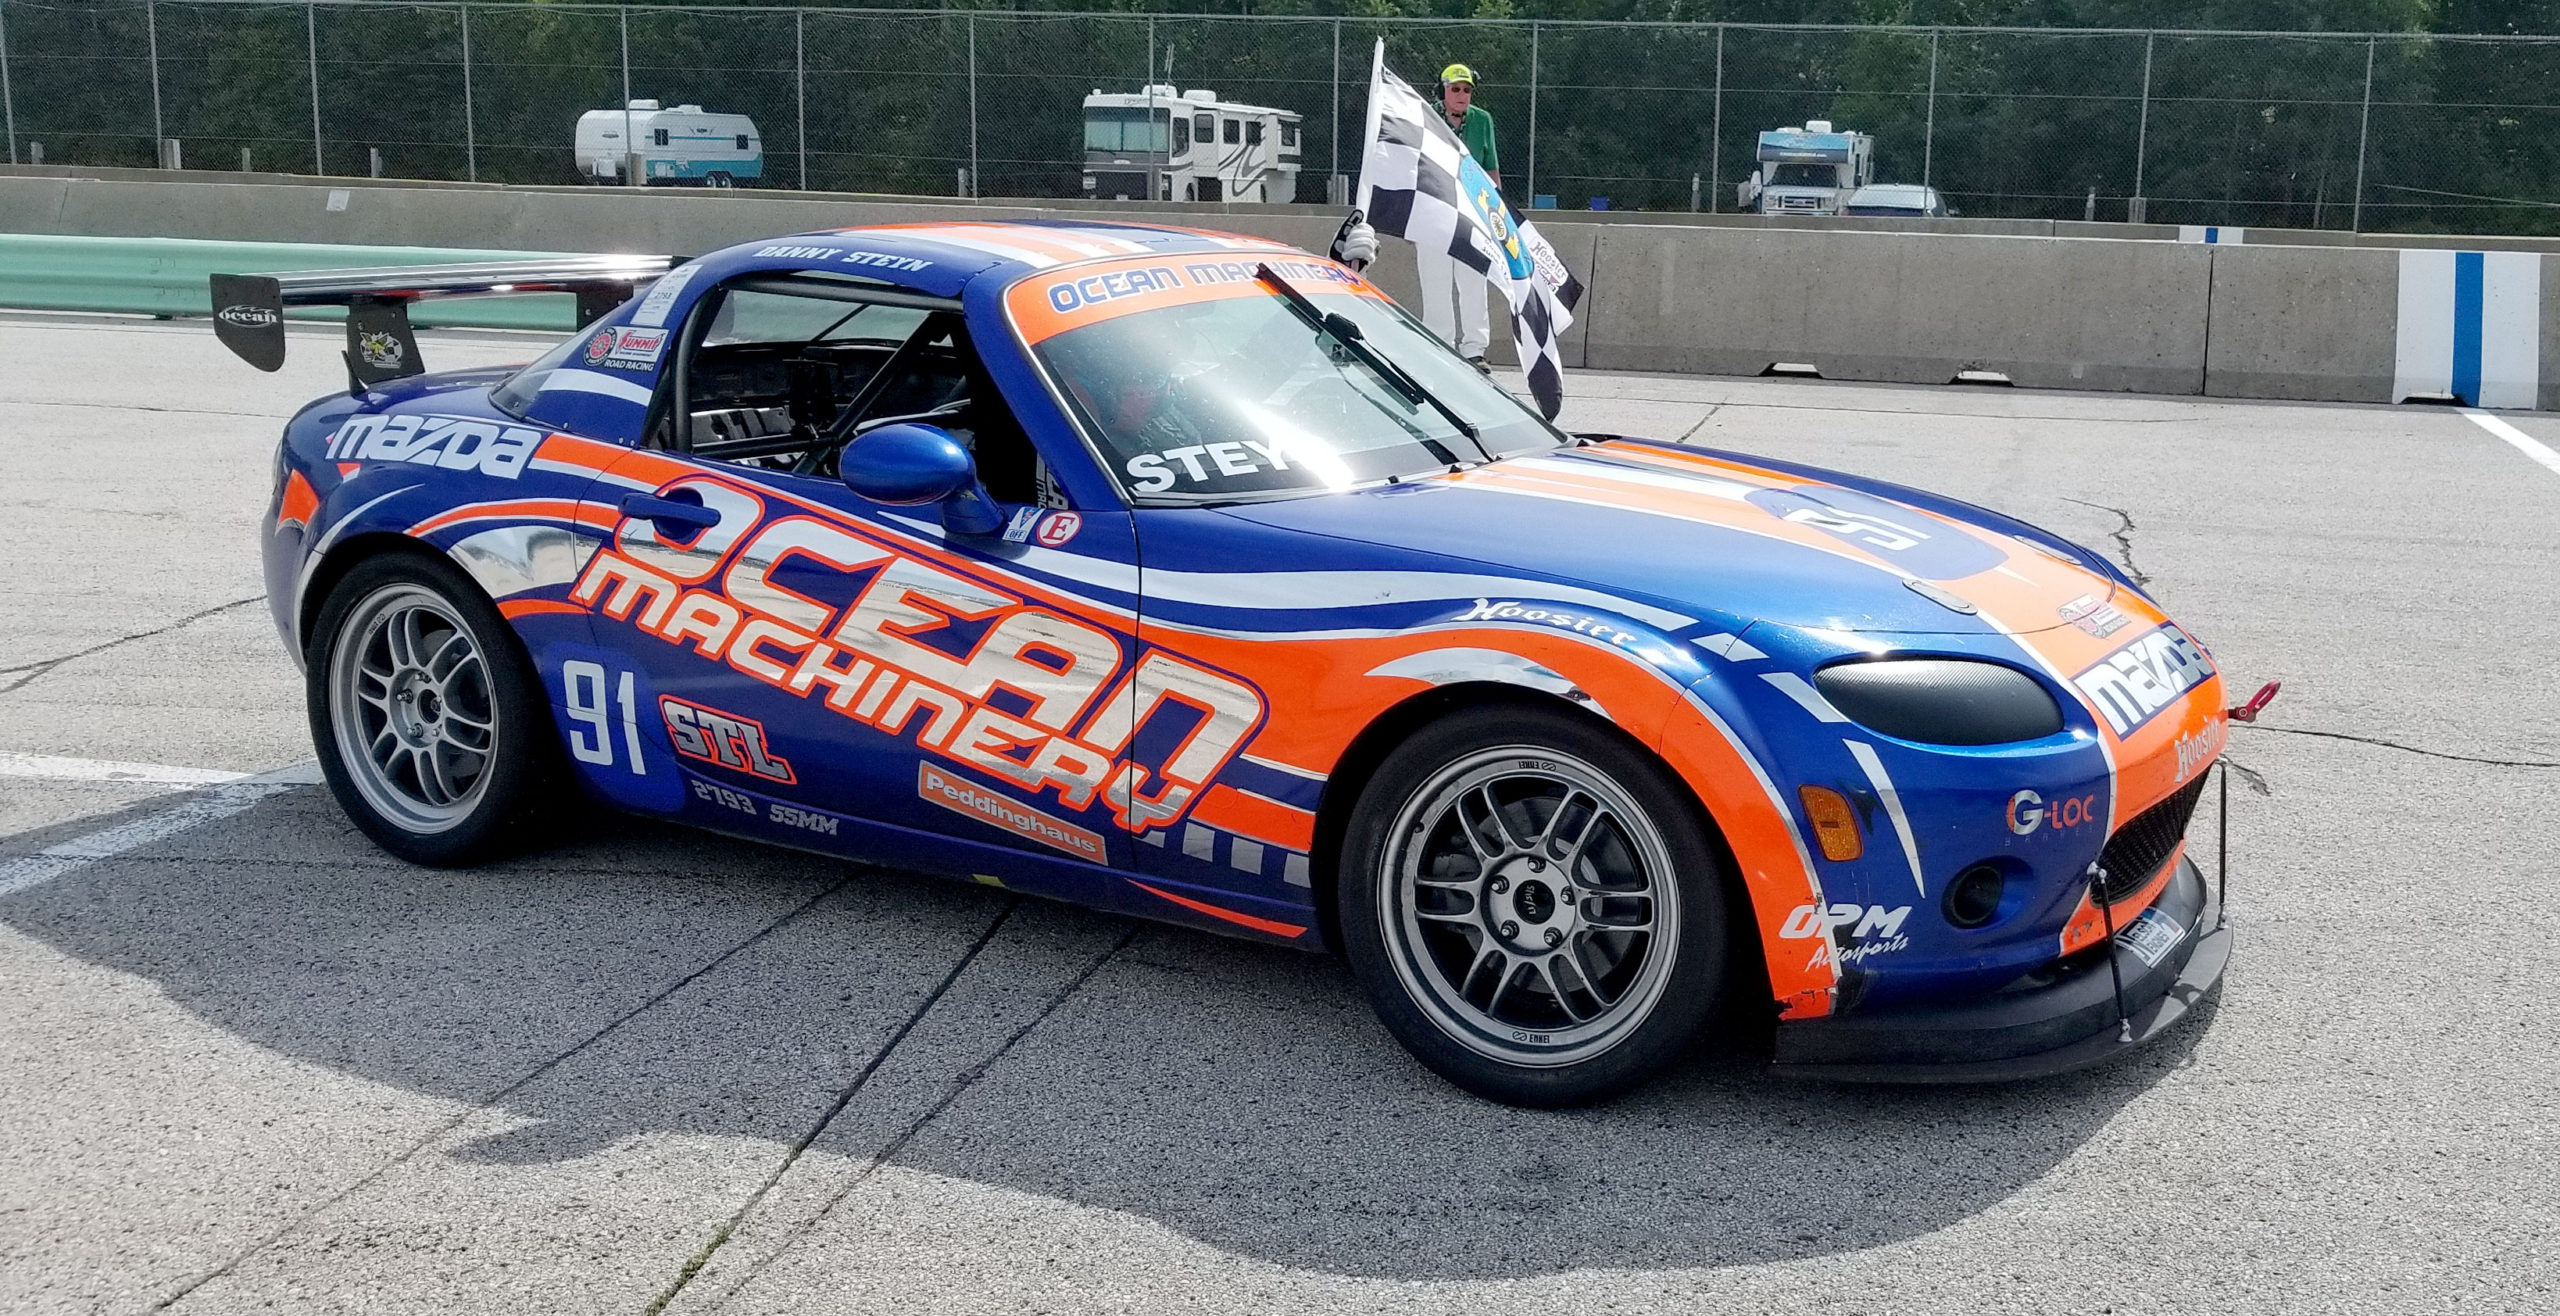 Proudly displaying the checkered flag after back-to-back victories at 2018 SCCA June Sprints